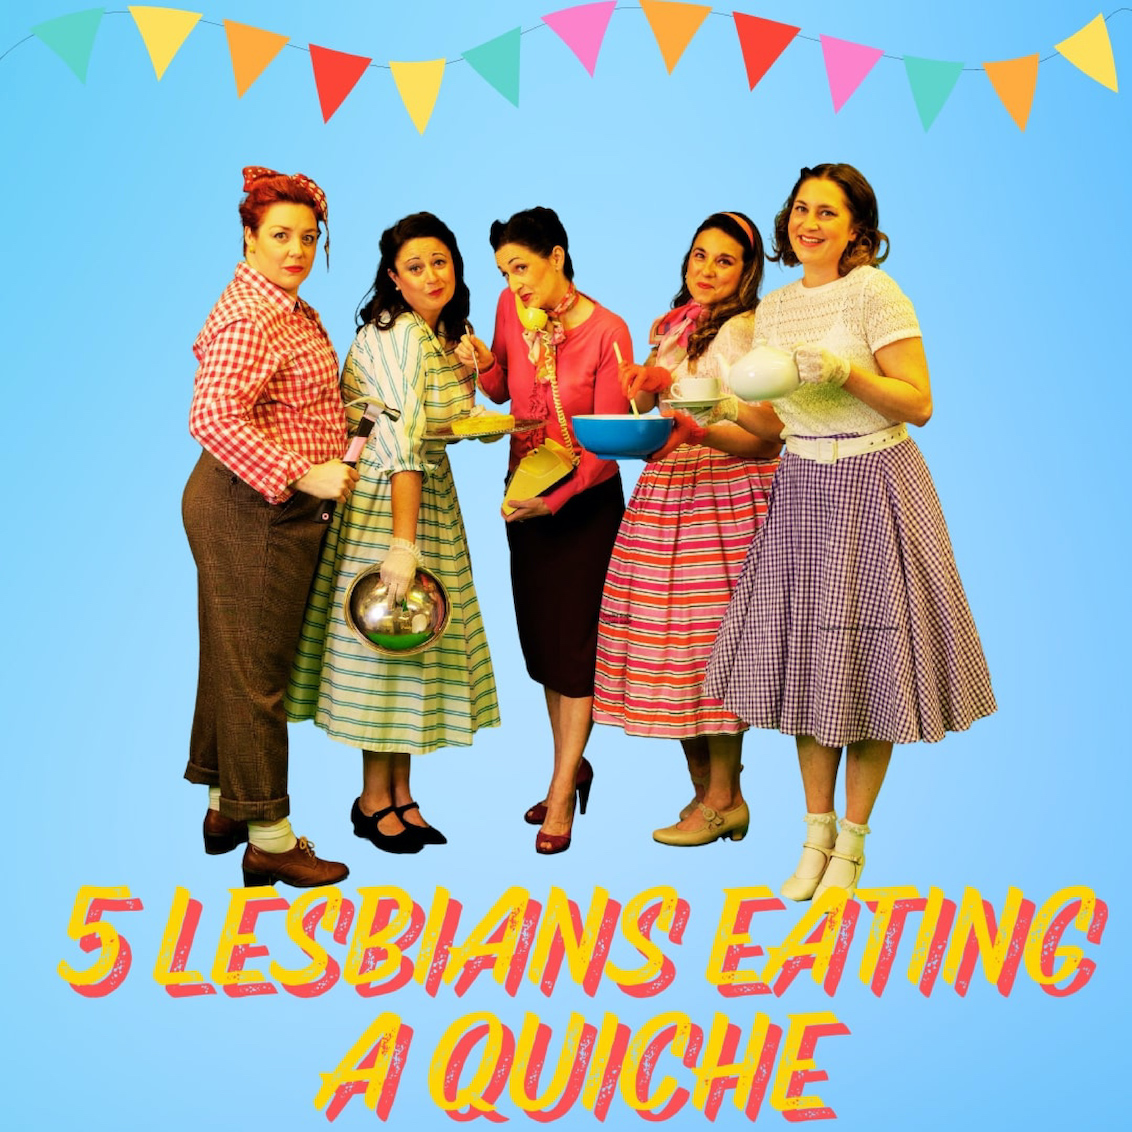 Westacre Theatre Company presents two performances of 5 Lesbians eating a Quiche today at Westacre Theatre - allthingsnorfolk.com/events/westacr…